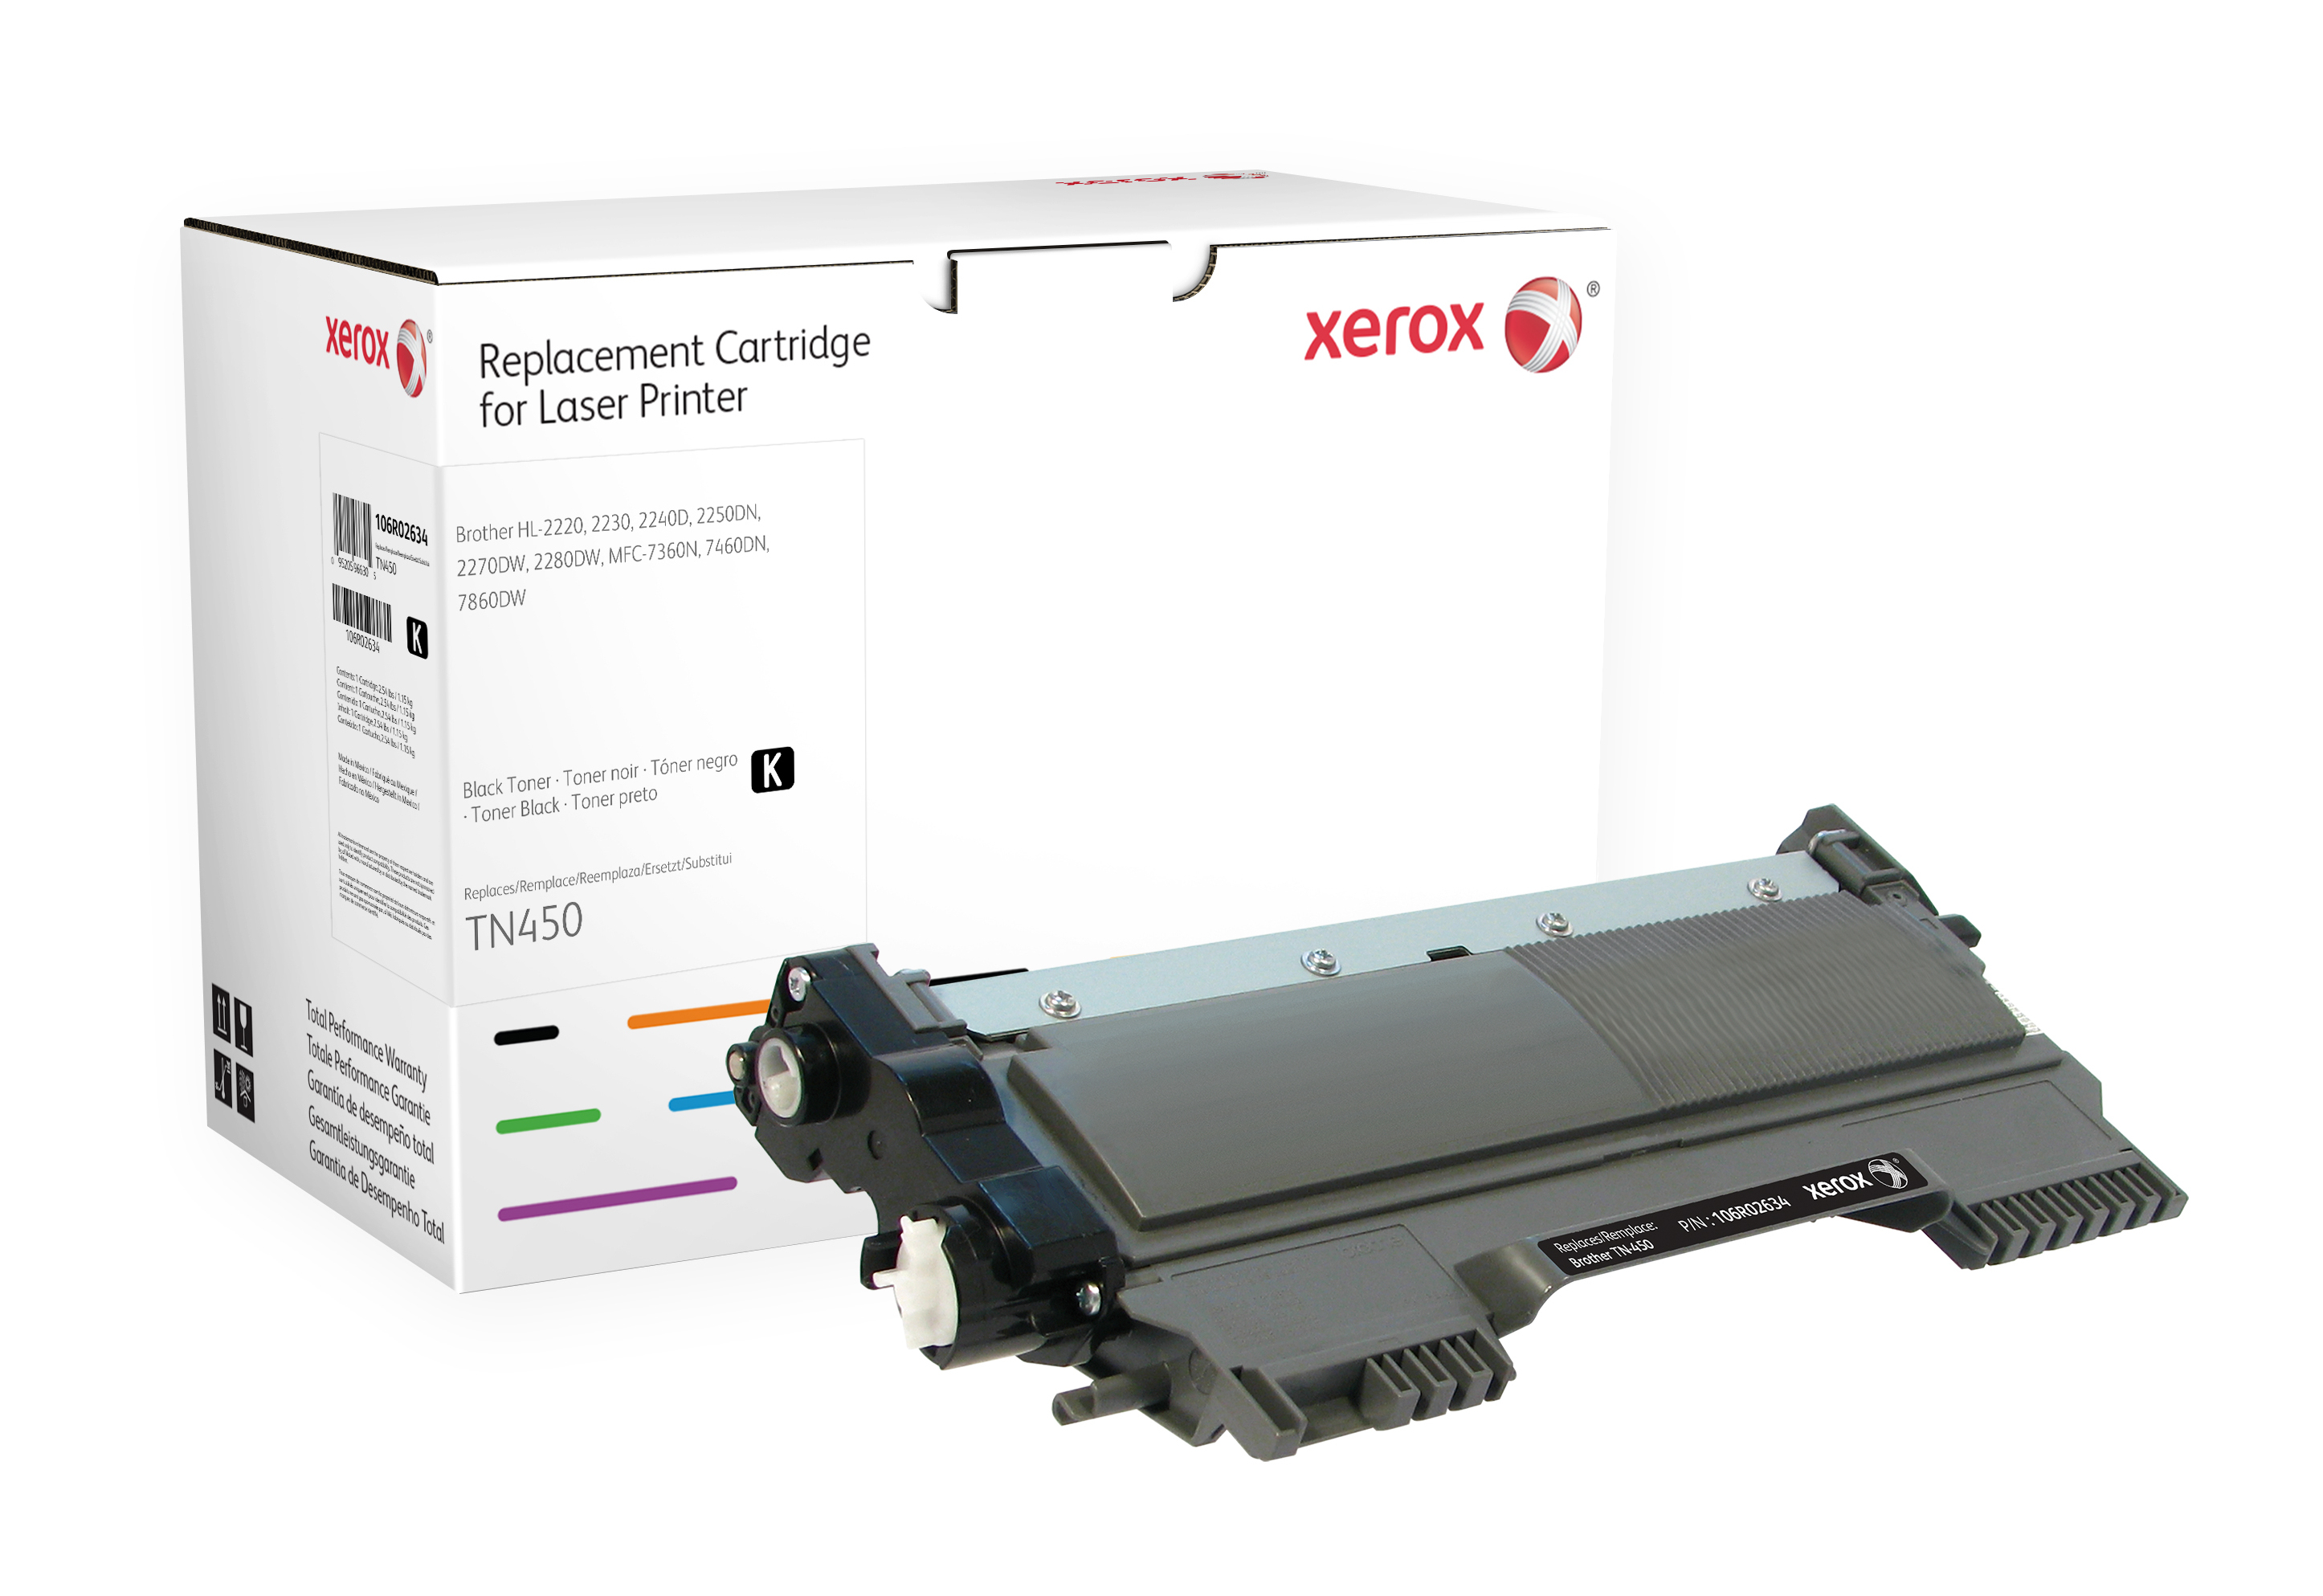 Image of Xerox Cartuccia toner nero. Equivalente a Brother TN2220. Compatibile con Brother DCP-7060D, DCP-7065DN, HL-2240/HL-2240D, HL-2250DN, HL-2270DW, MFC-7360N/7460DN/7860DW